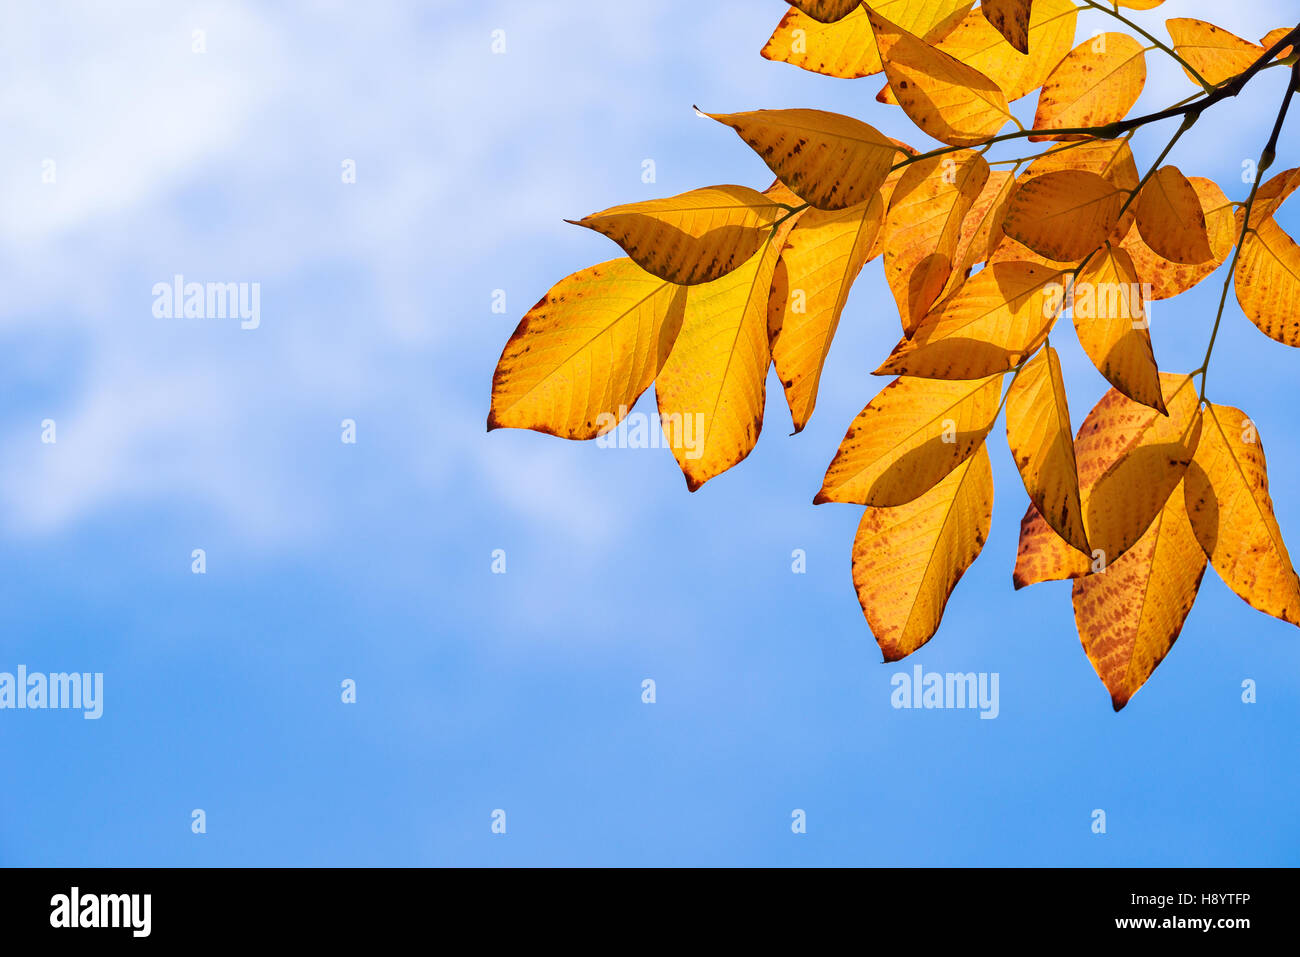 Golden yellow autumn leaves on a branch against blue sky Stock Photo